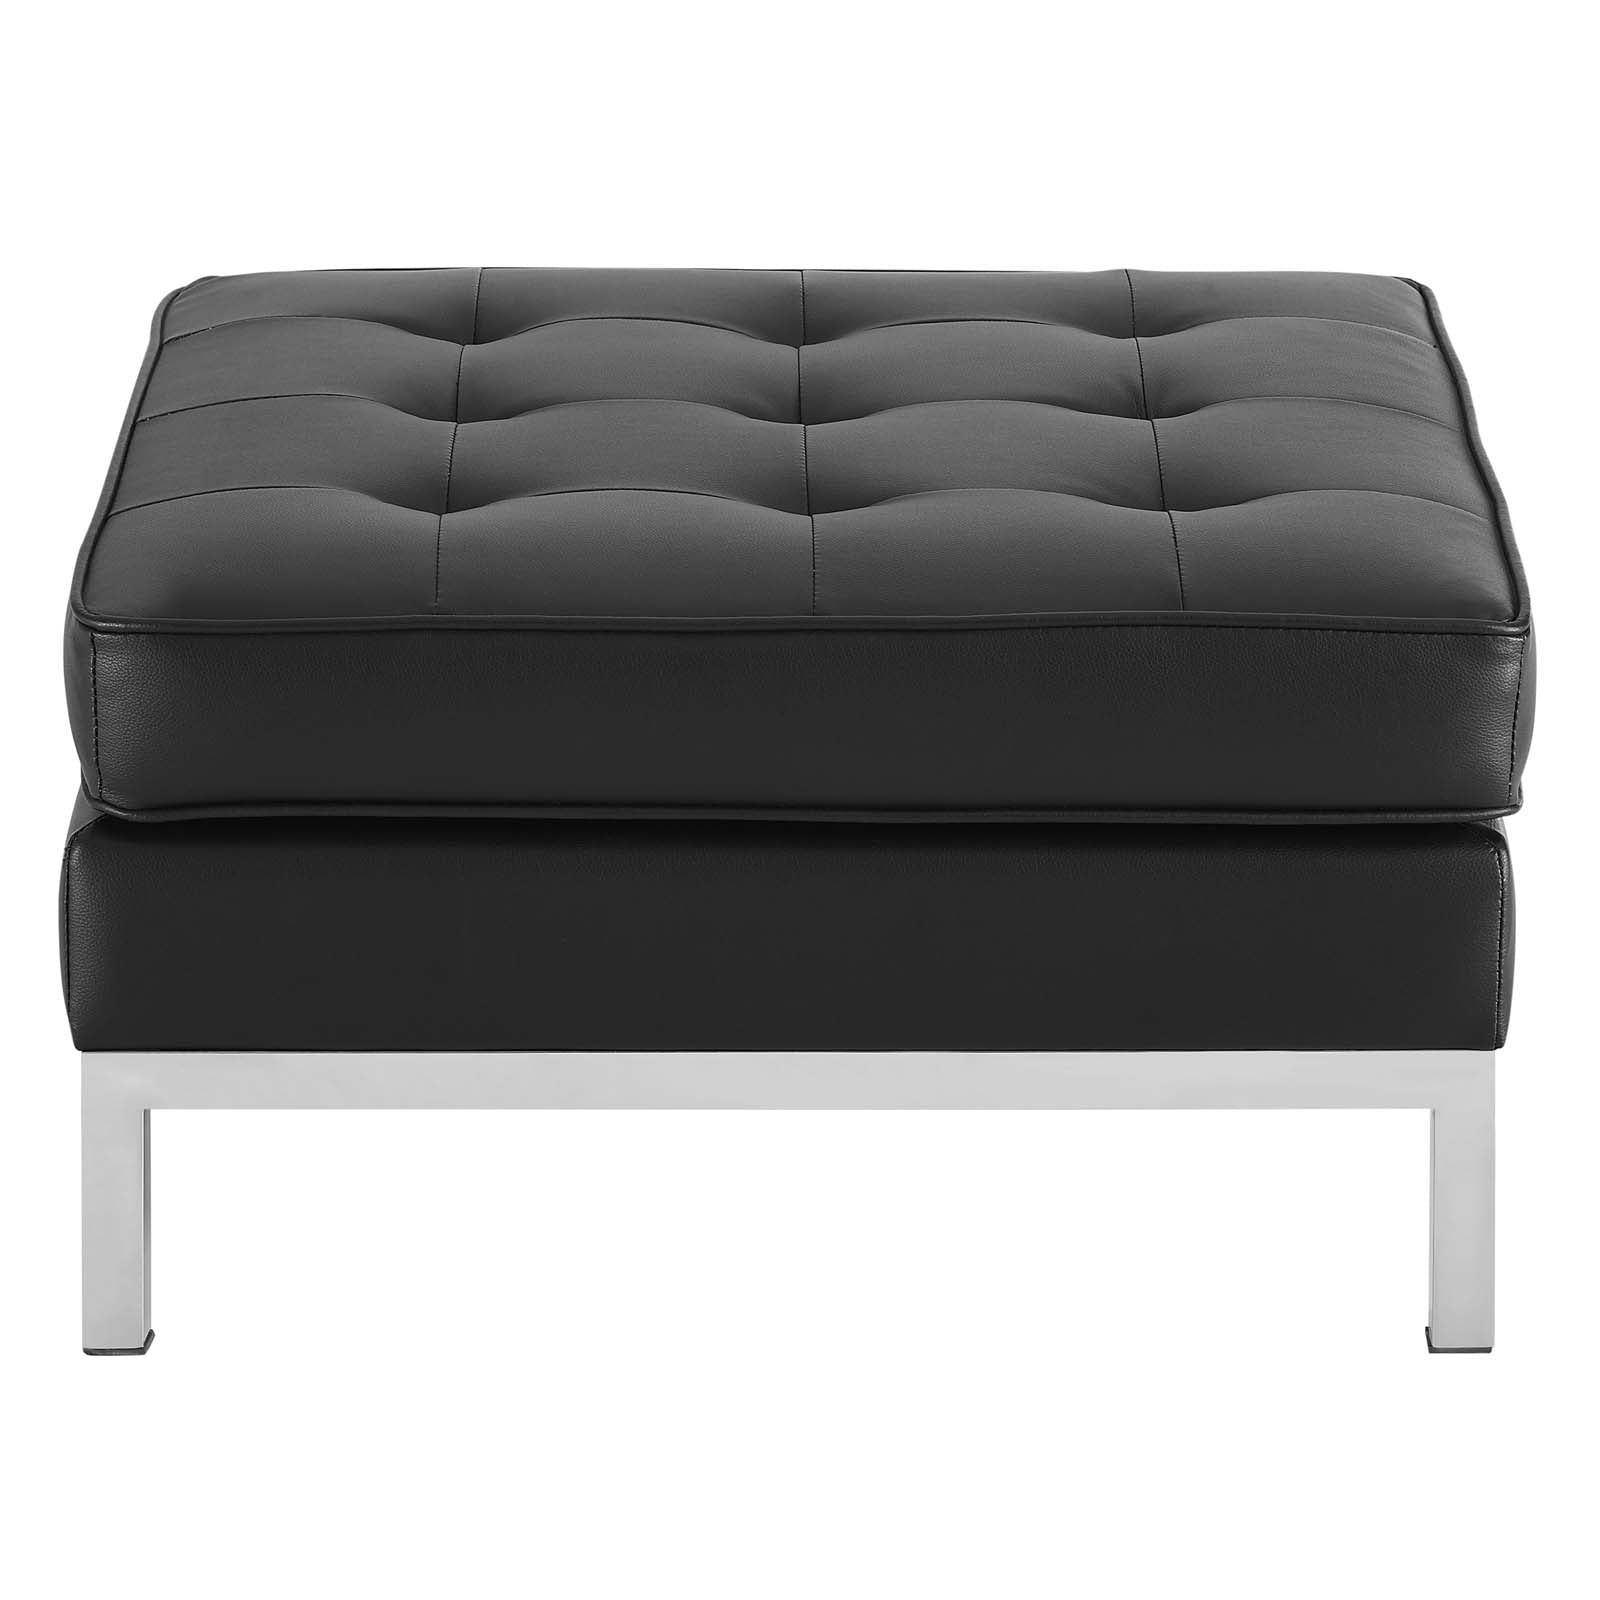 Loft Tufted Upholstered Faux Leather Ottoman - East Shore Modern Home Furnishings